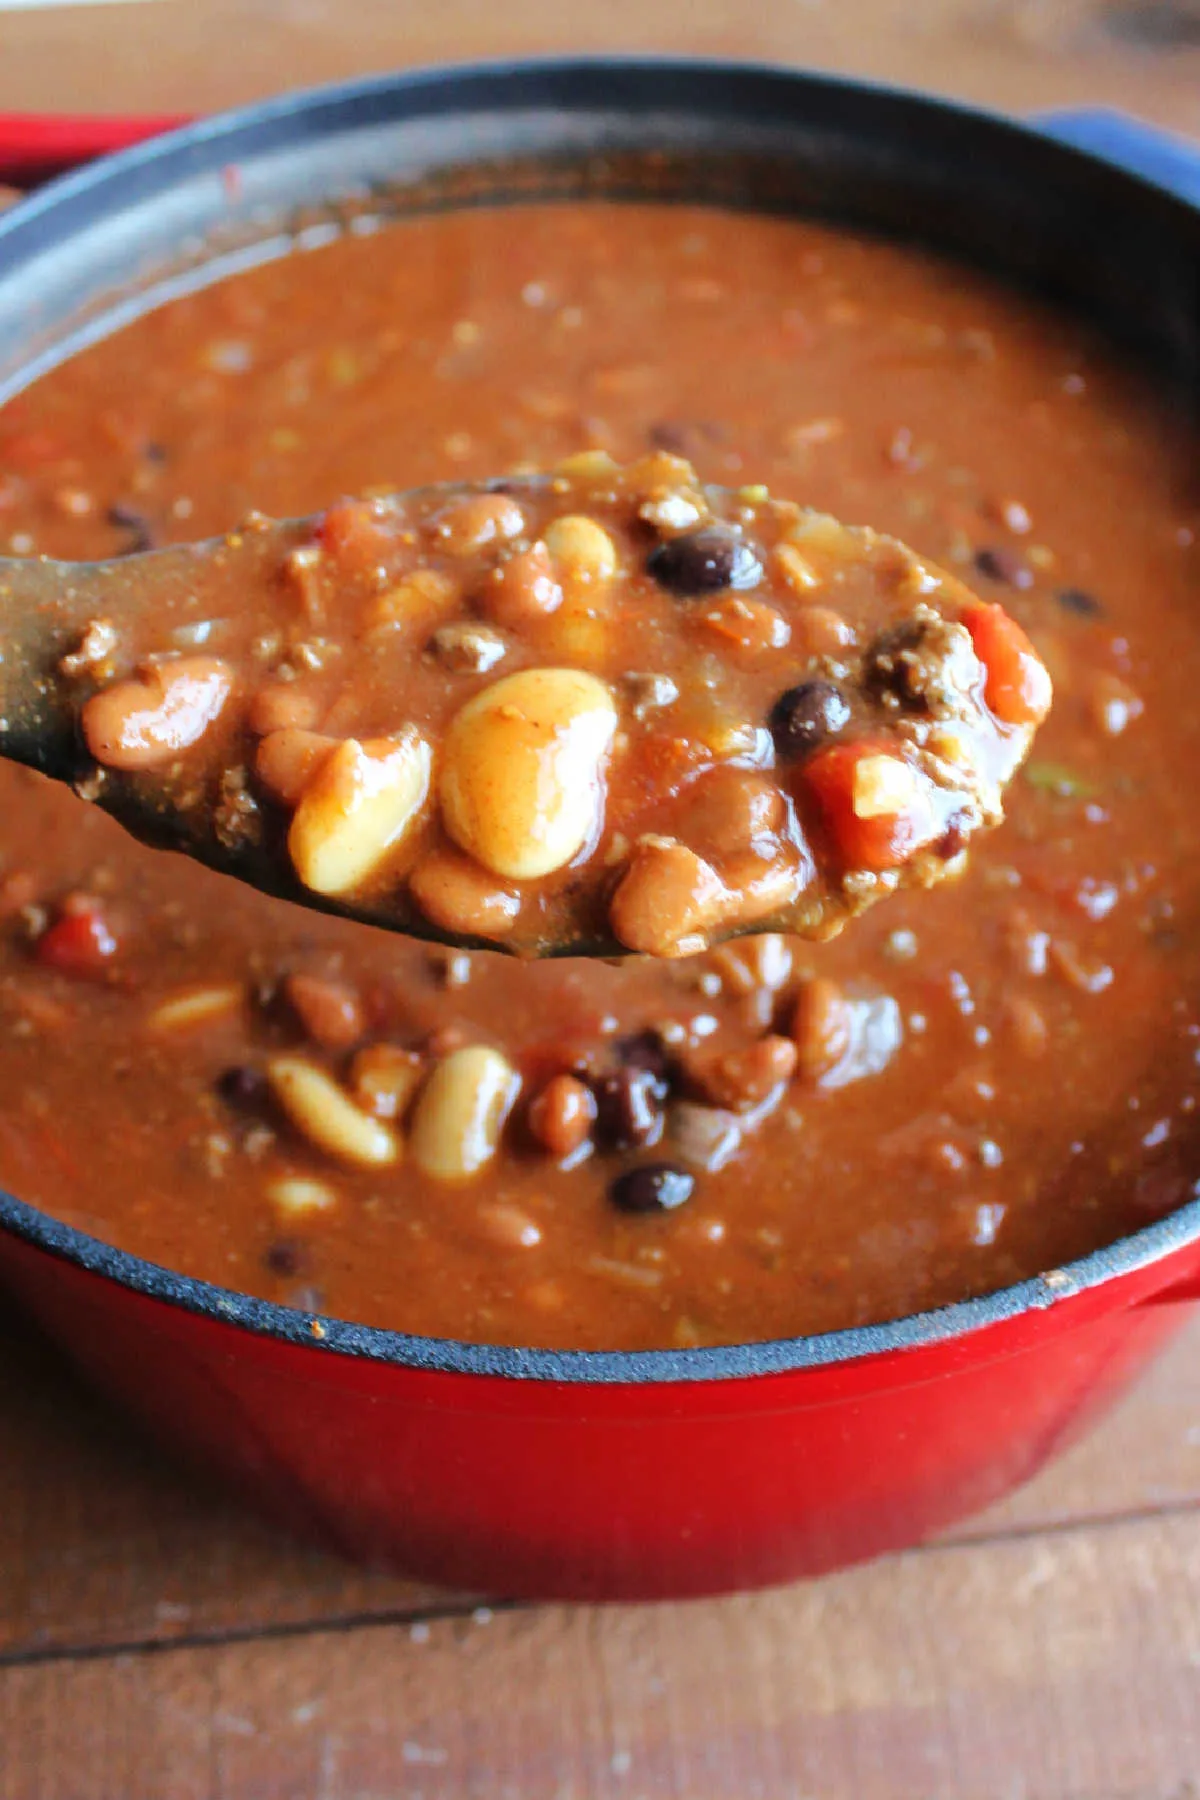 Large serving spoon filled with a heaping scoop of venison chili showing a variety of beans.